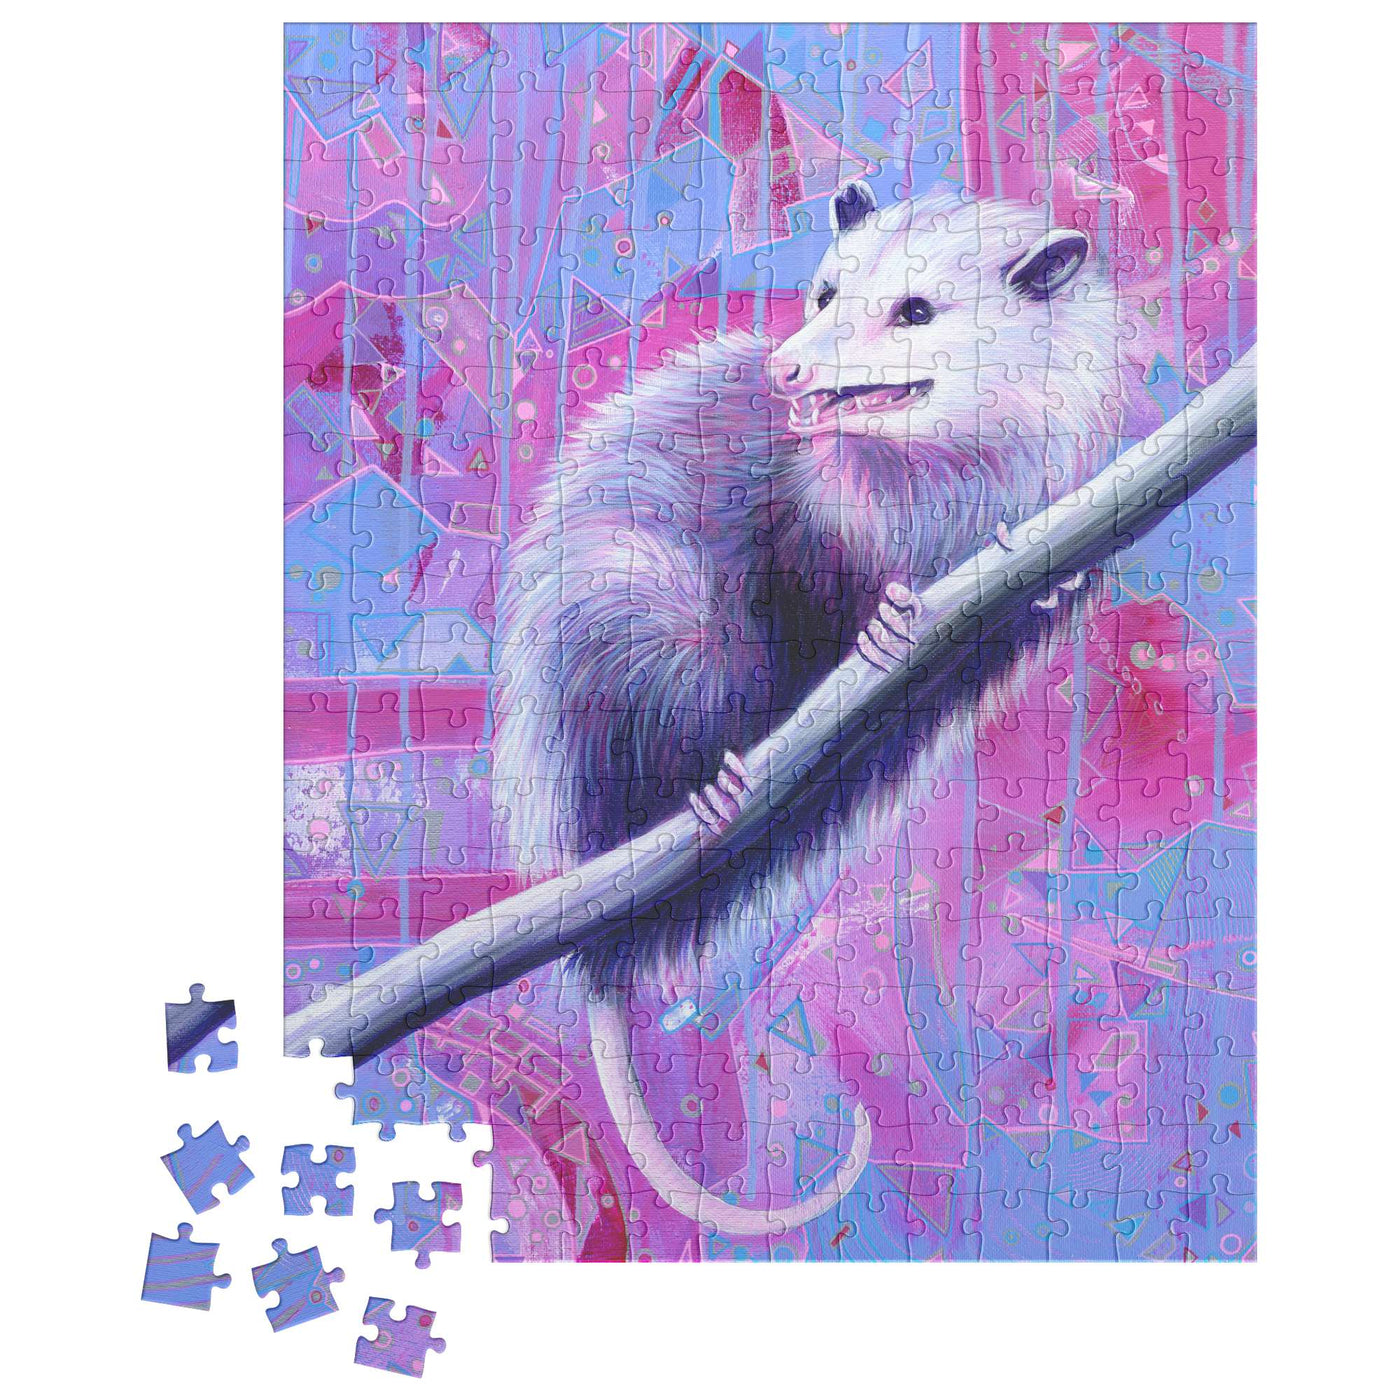 An Opossum jigsaw Puzzle featuring a white possum on a branch, partially assembled with loose pieces scattered nearby.